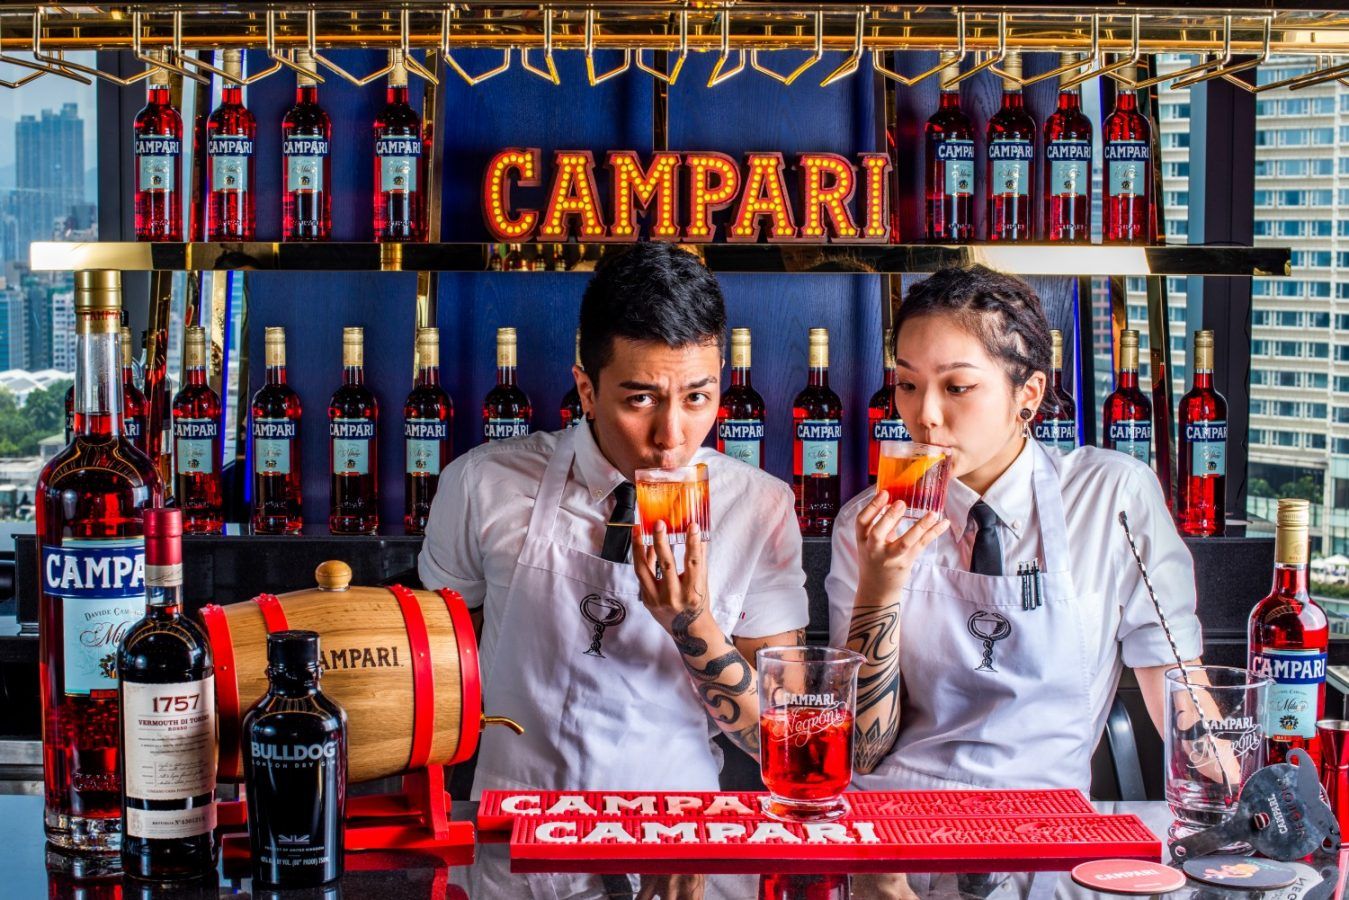 Negroni Week 2022: Drink for a Cause this September